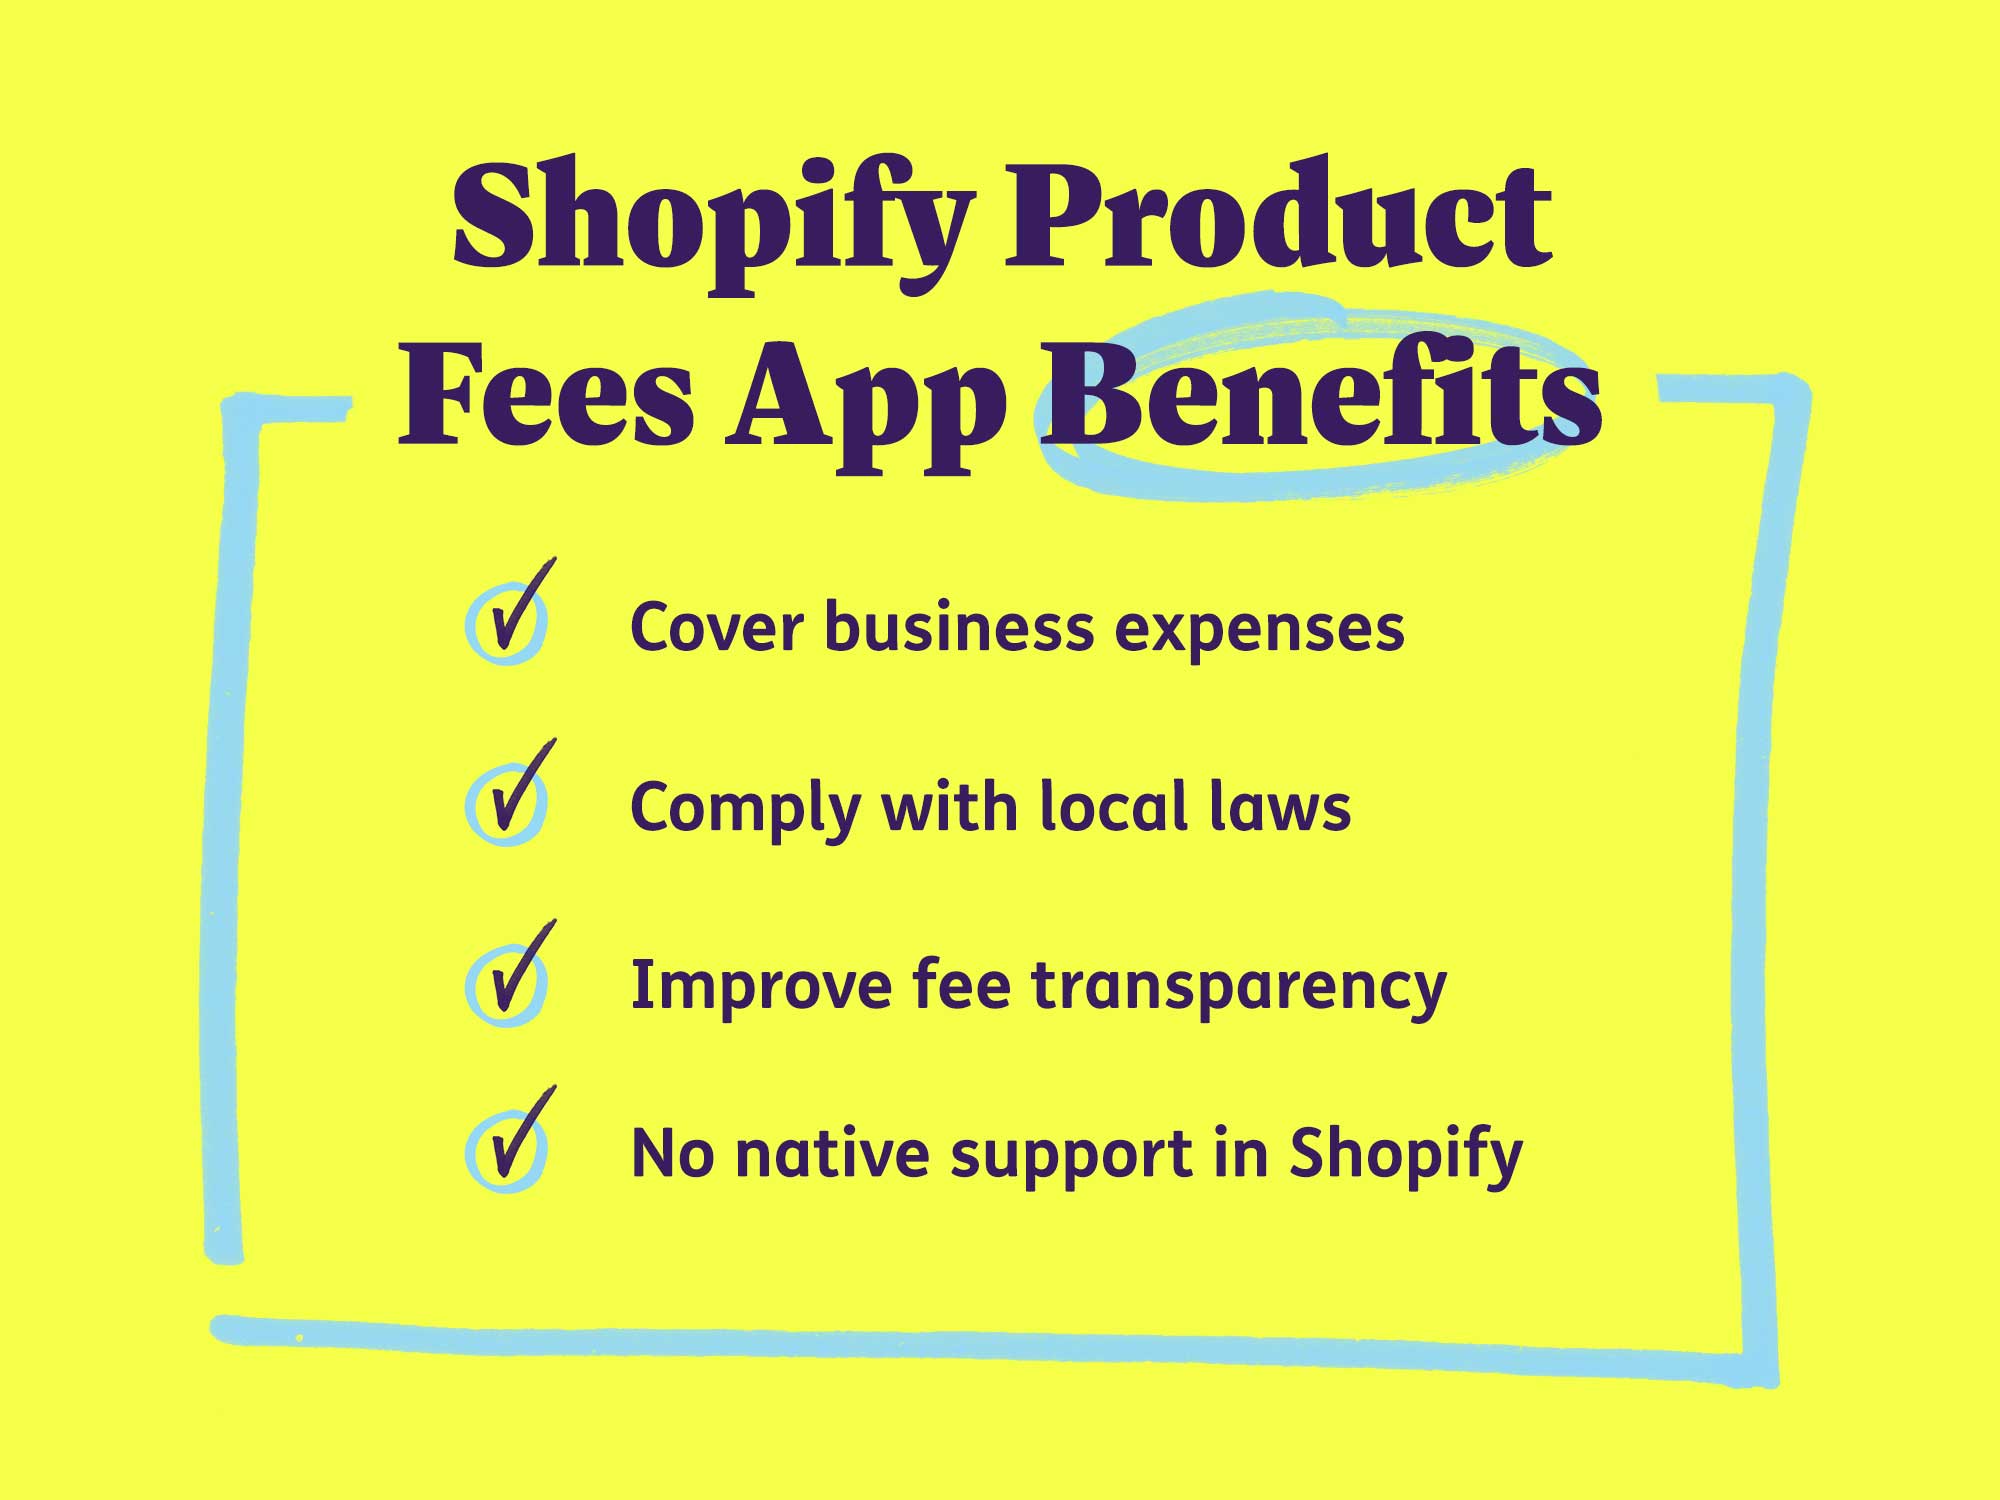 Shopify Product Fees App Benefits: Cover business expenses, comply with local laws, improve fee transparency, and no native support in Shopify.